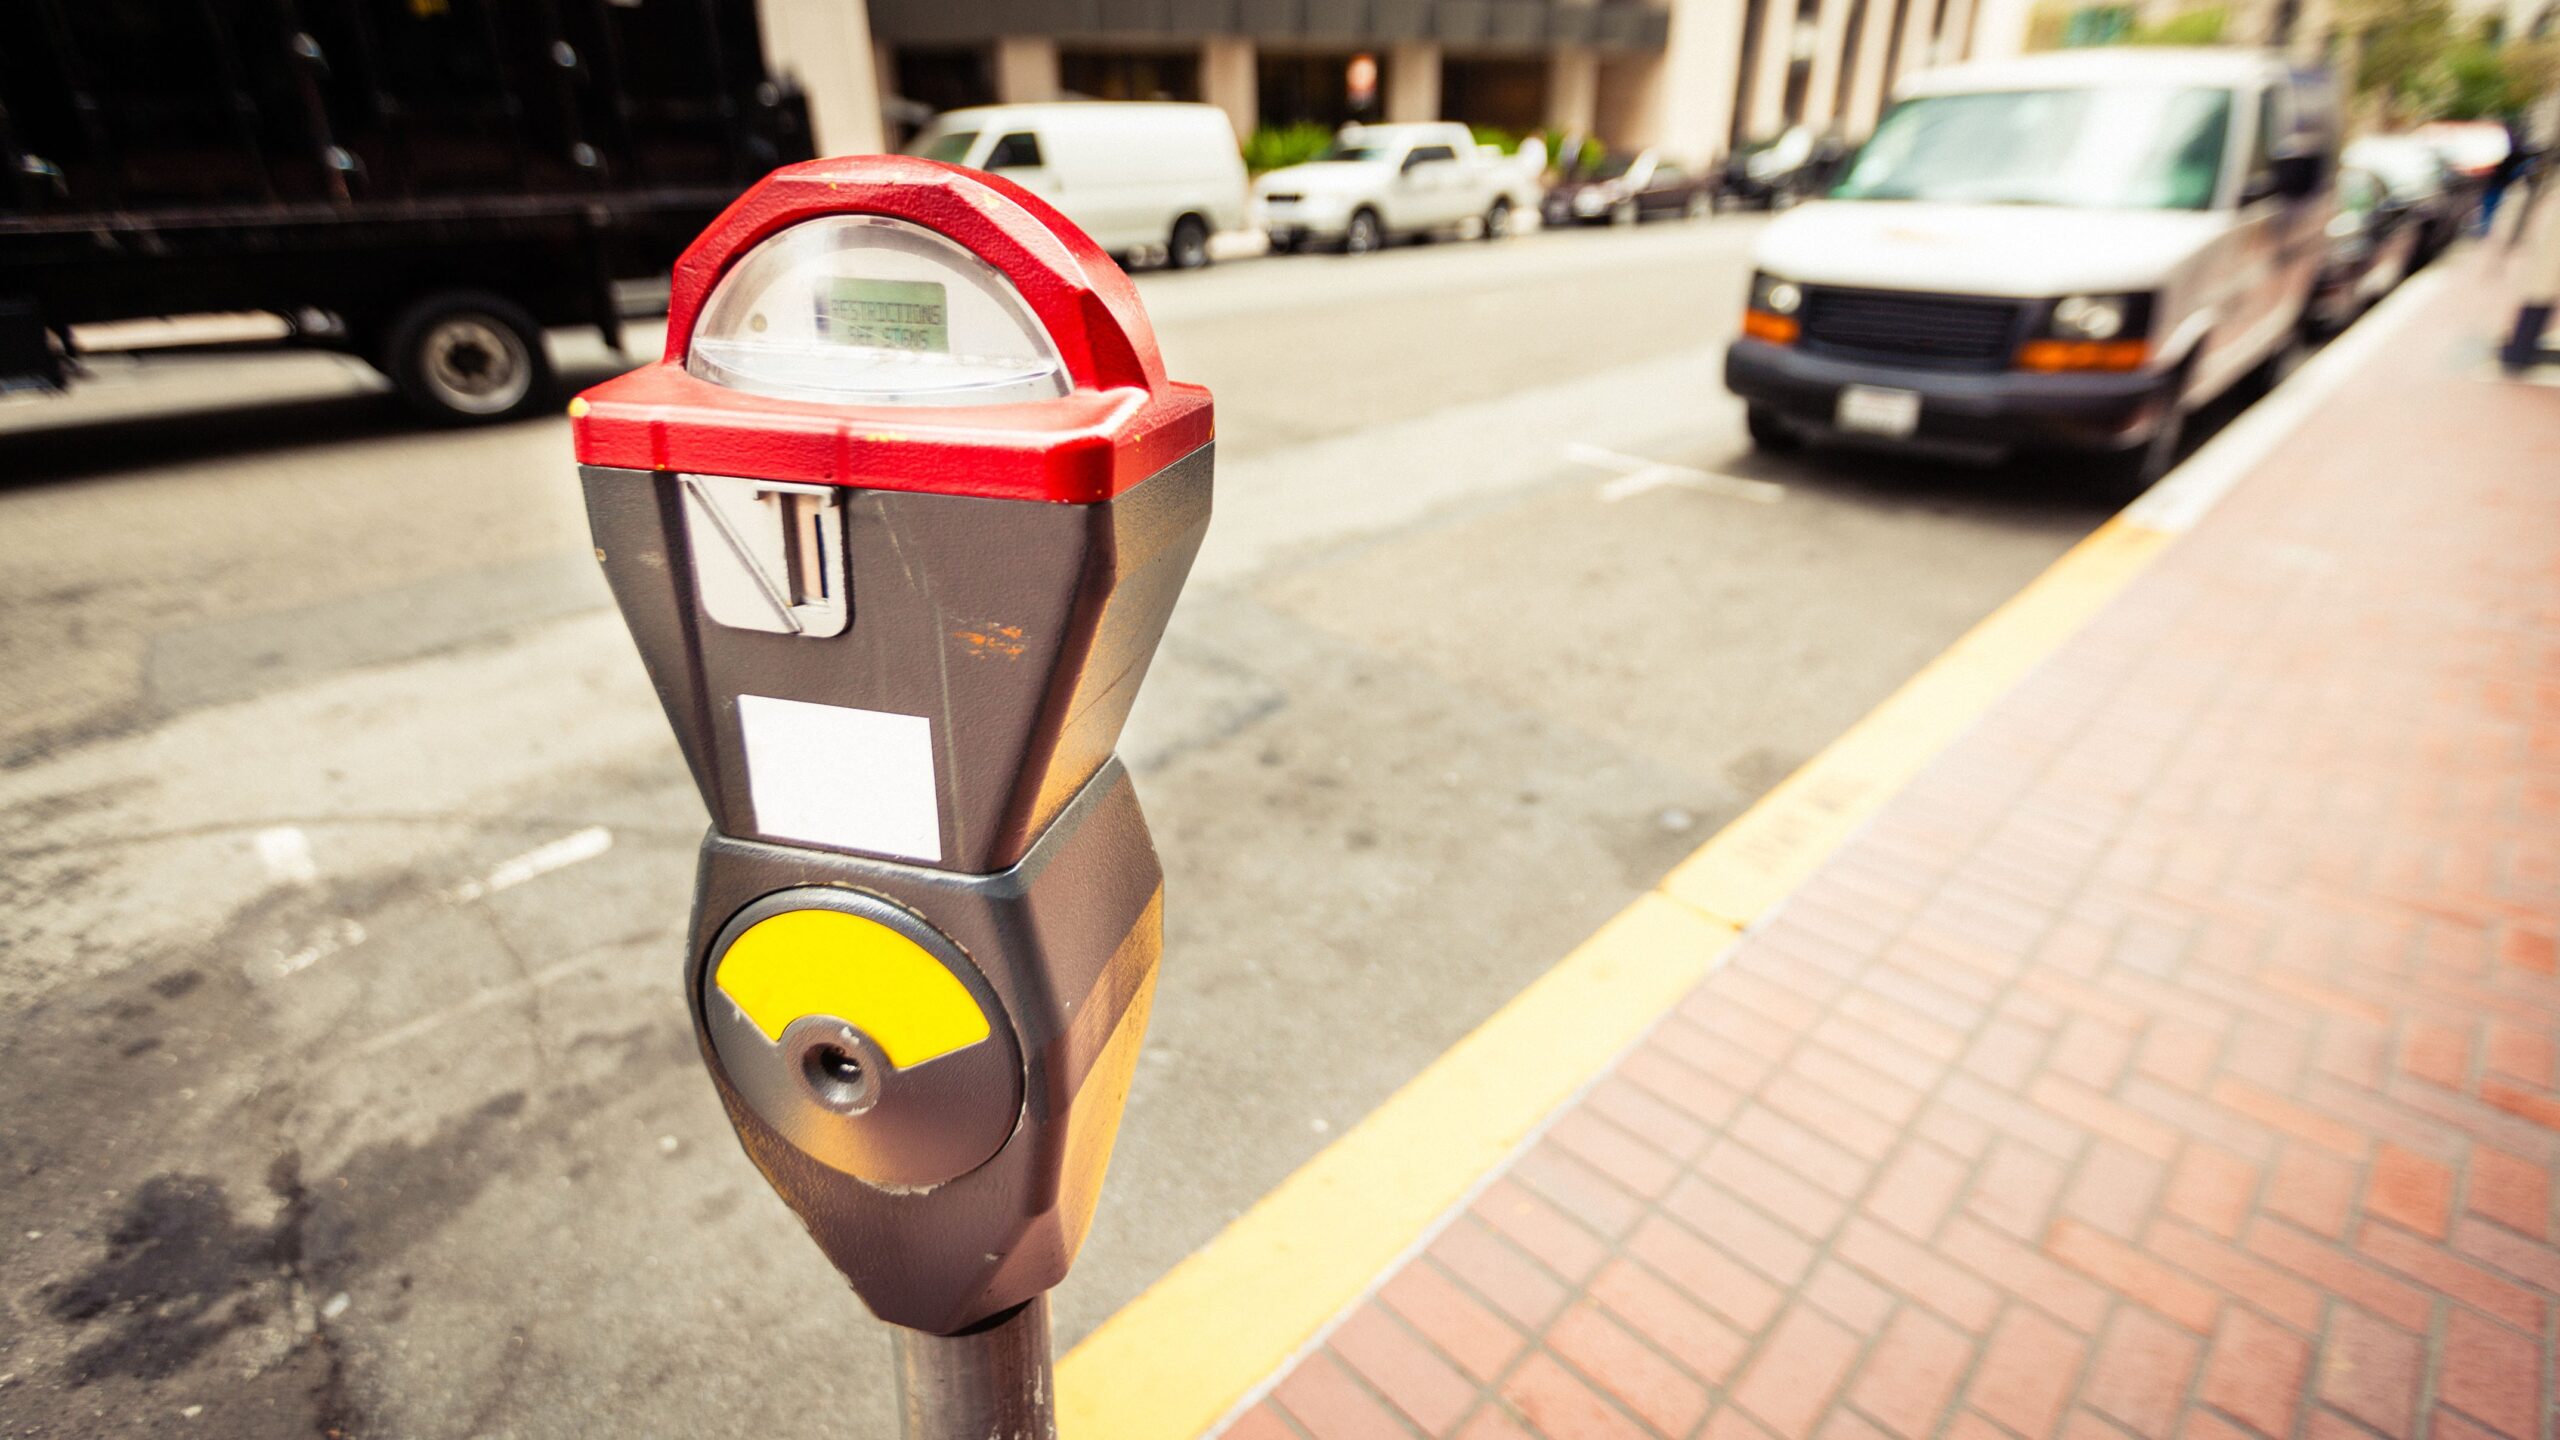 On Street Vehicle Parking Meter Market Outlook for Major Applications and Growth Rate 2028